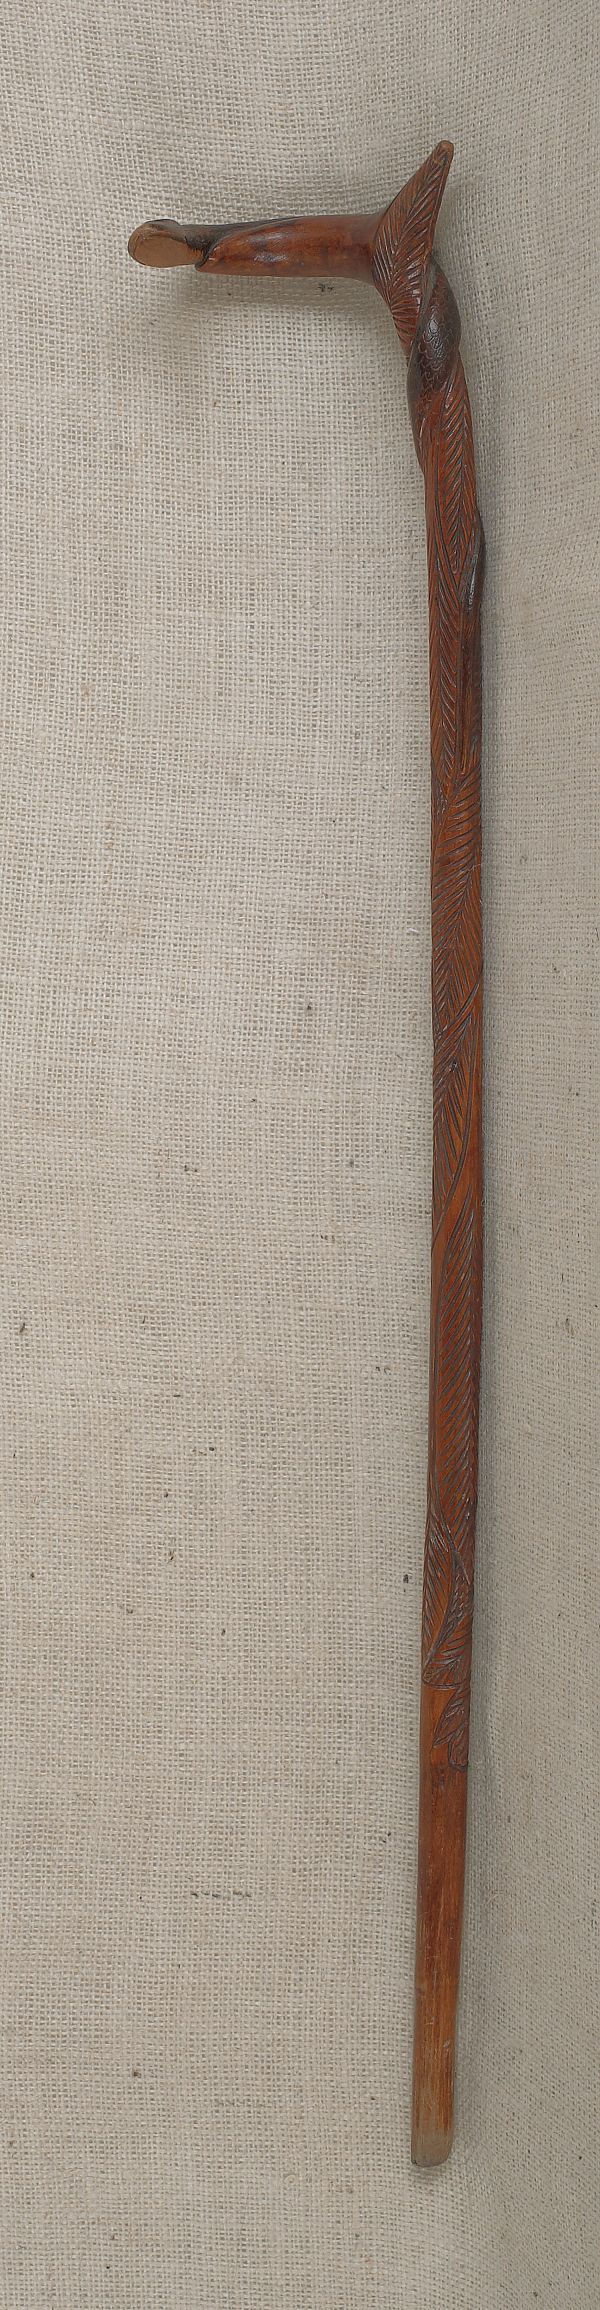 Carved cane late 19th c with a 17583f